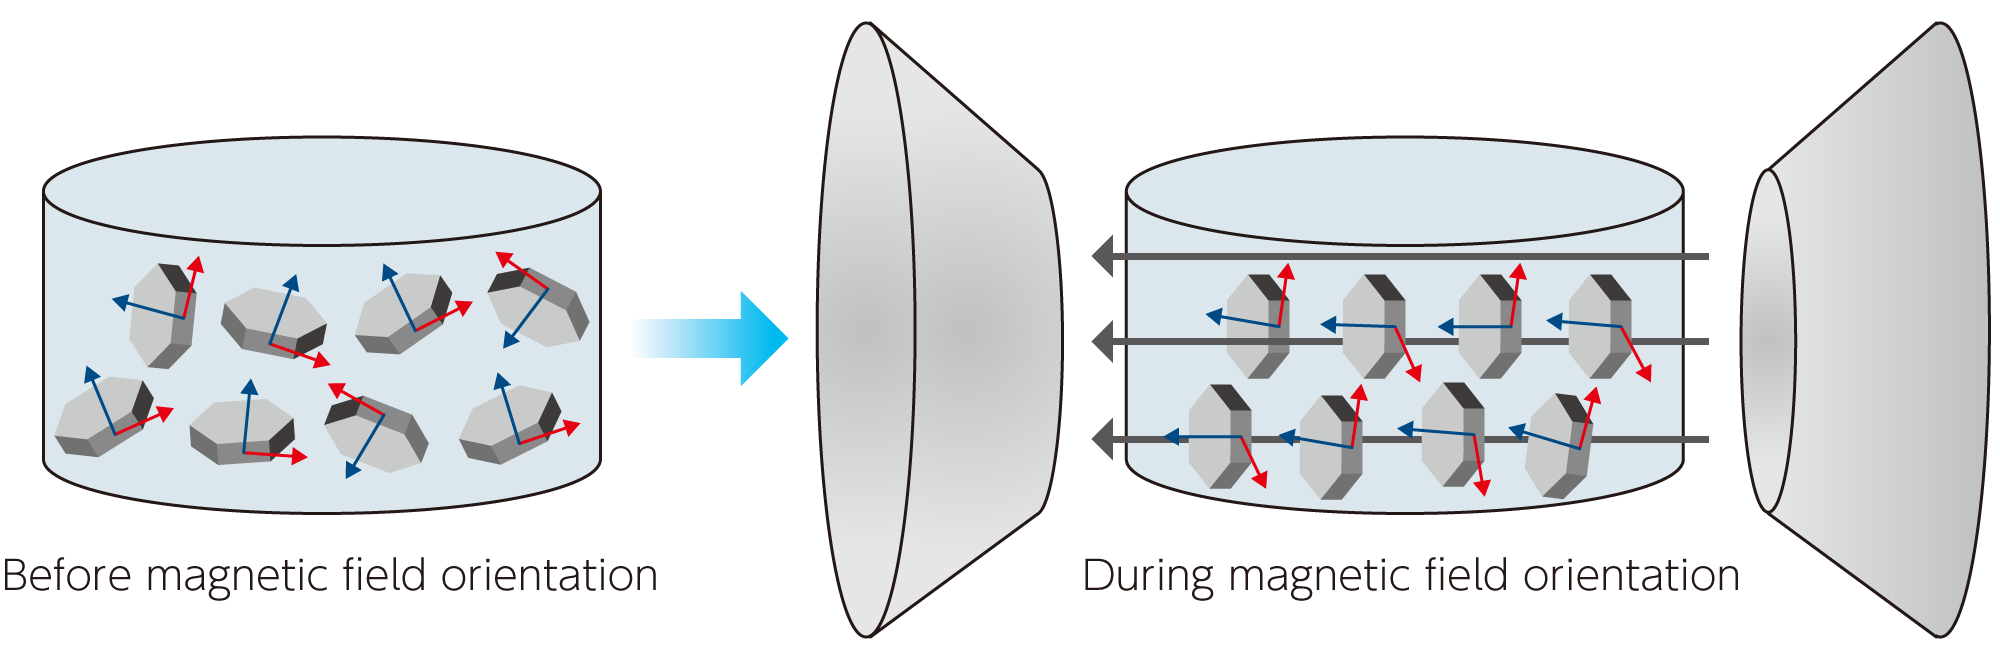 Magnetic oriented